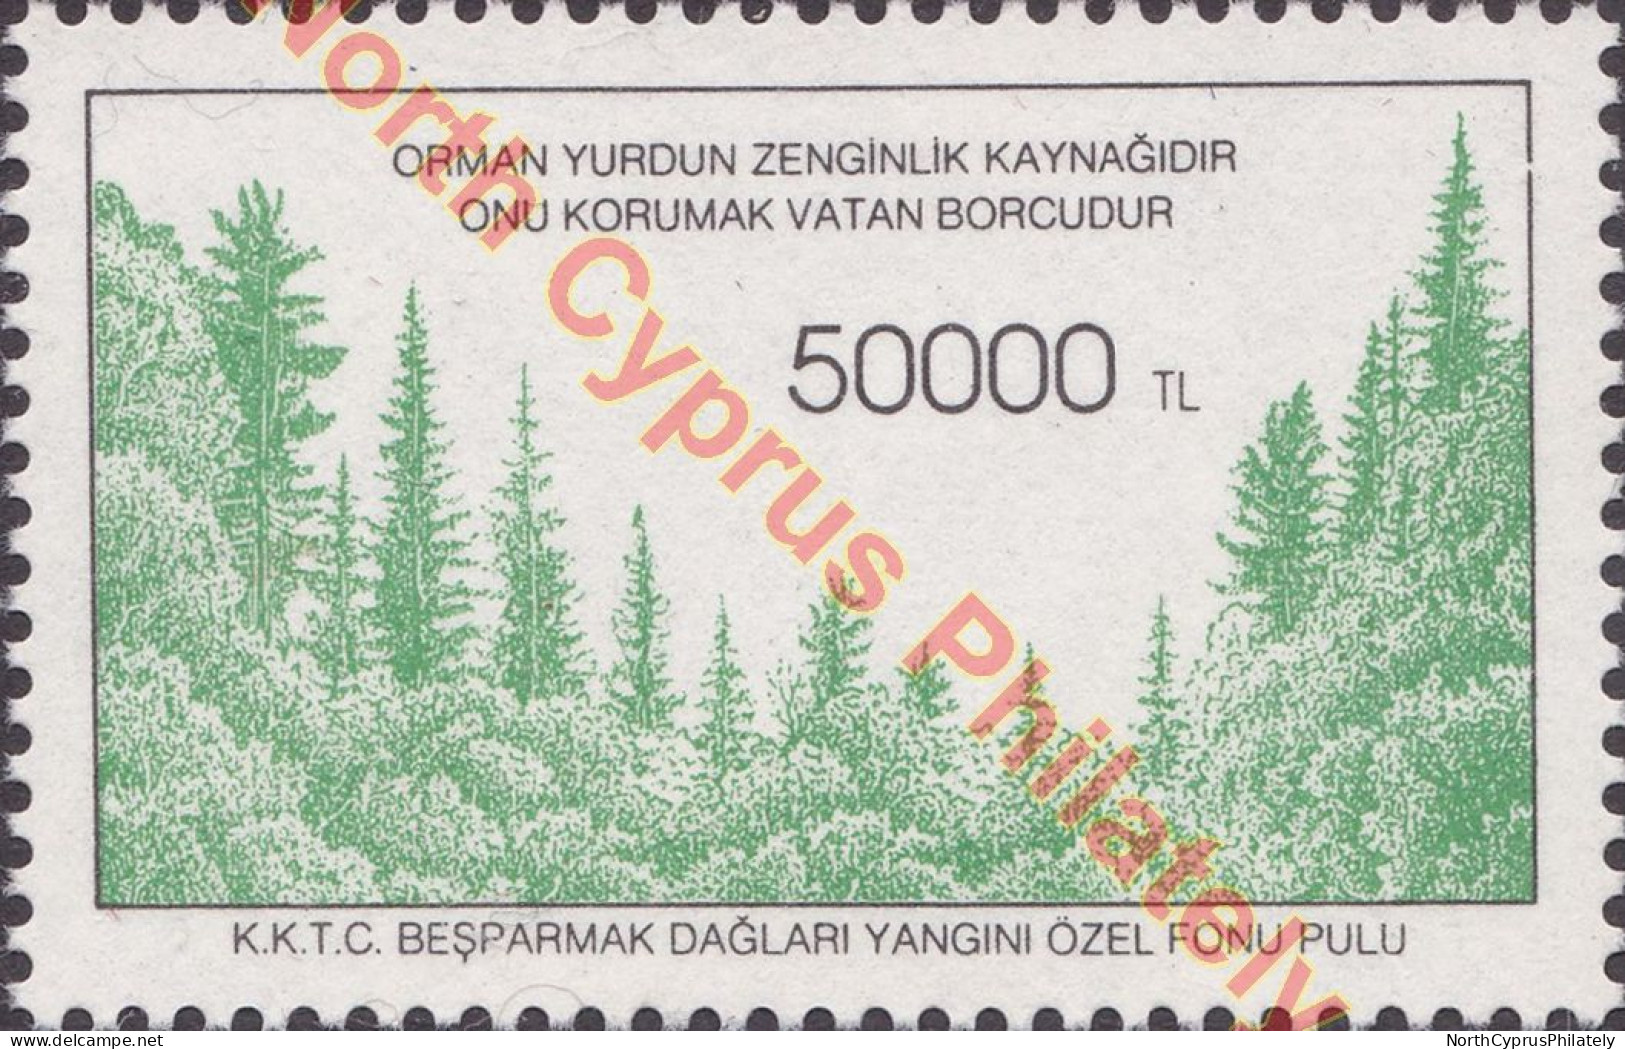 TURKISH CYPRUS 1995 CHARITY FUND FOR FOREST FIRE DAMAGES "Complete Set" MNH - Unused Stamps